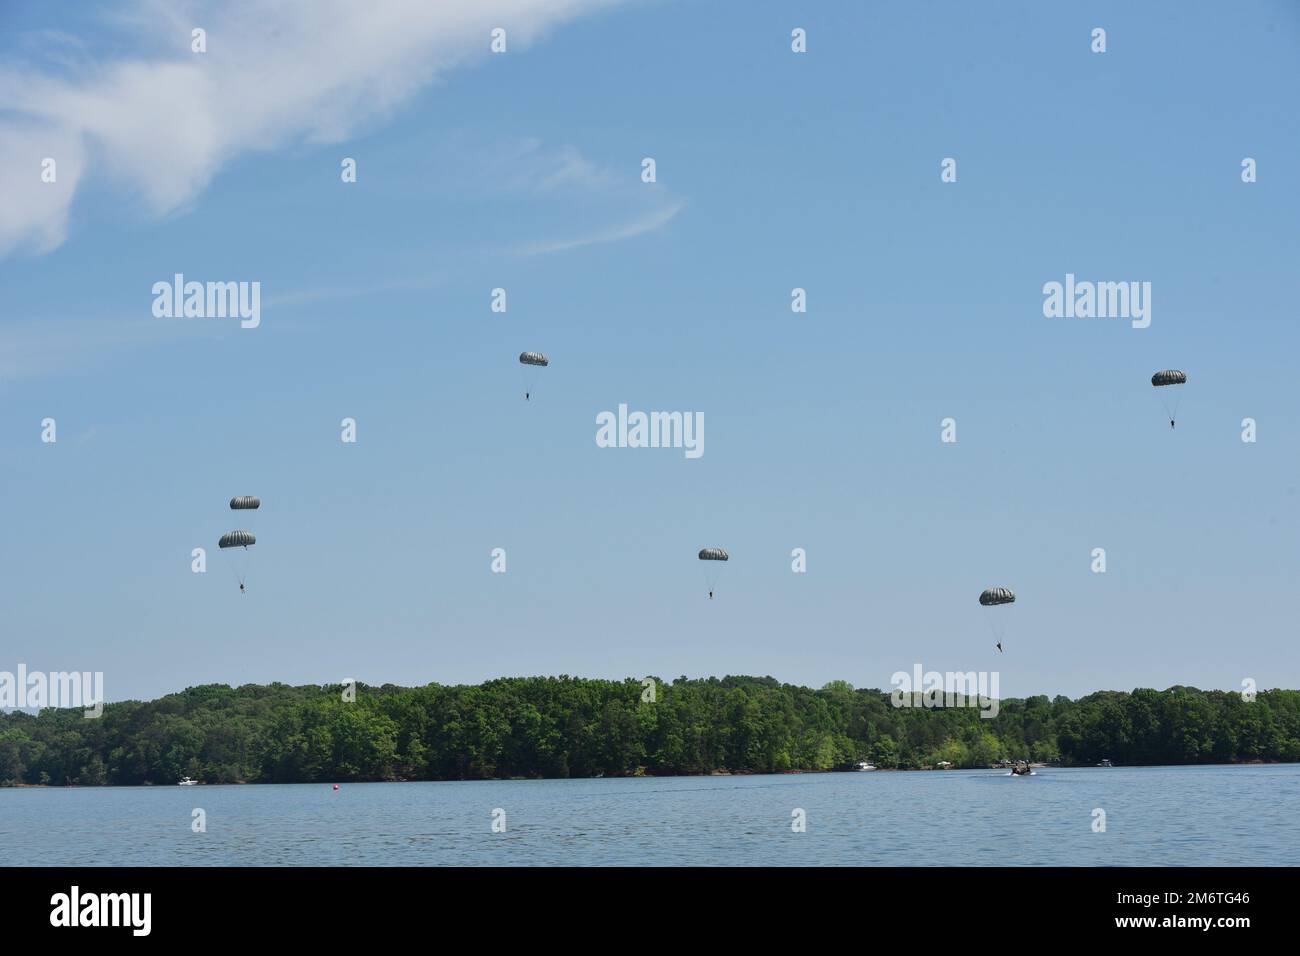 Soldiers from the 5th Ranger Training Battalion parachute into Lake Lanier, Georgia, May 5, 2022. This training involves jumpers practicing with a parachute coming down over their head in the water, surfacing and swimming out. Stock Photo